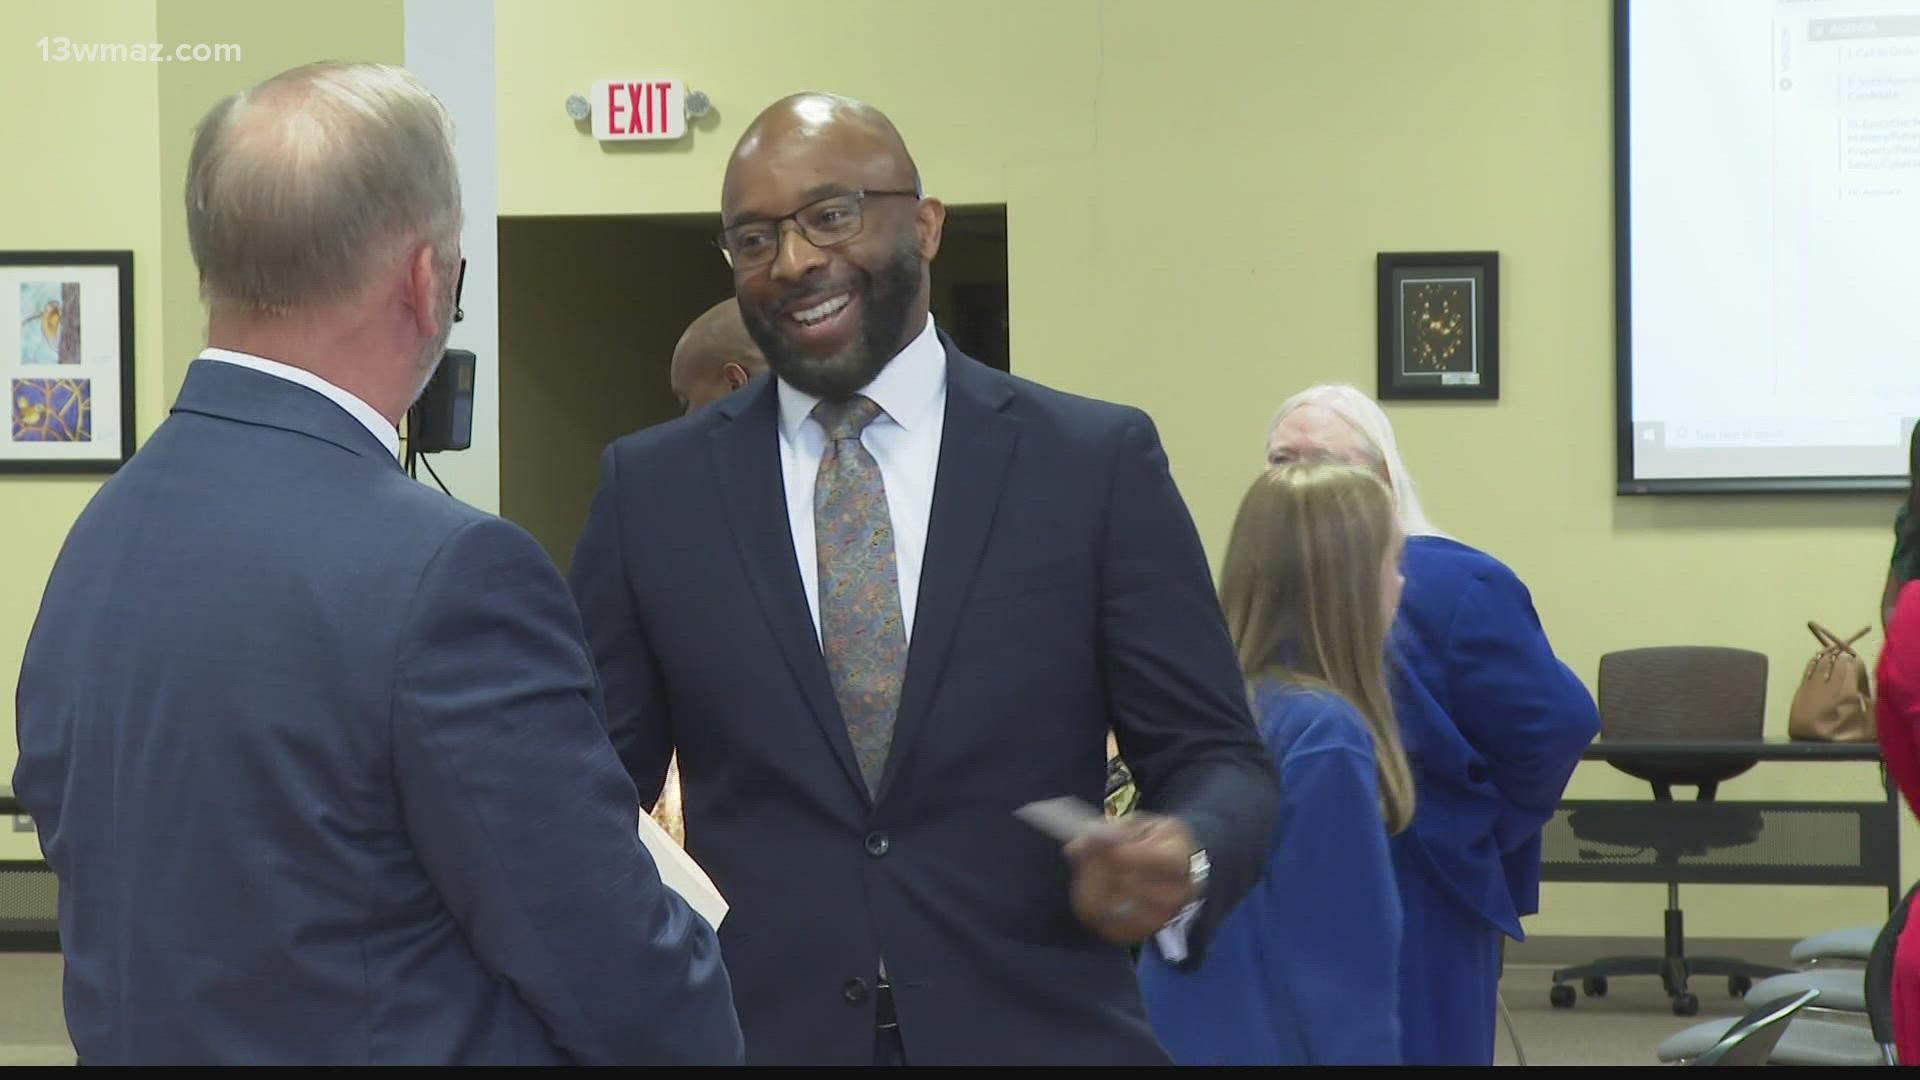 The Bibb County Board of Education voted 6-2 to appoint Sims, who is set to start working July 1. Board members Daryl Morton and Lisa Garrett voted against it